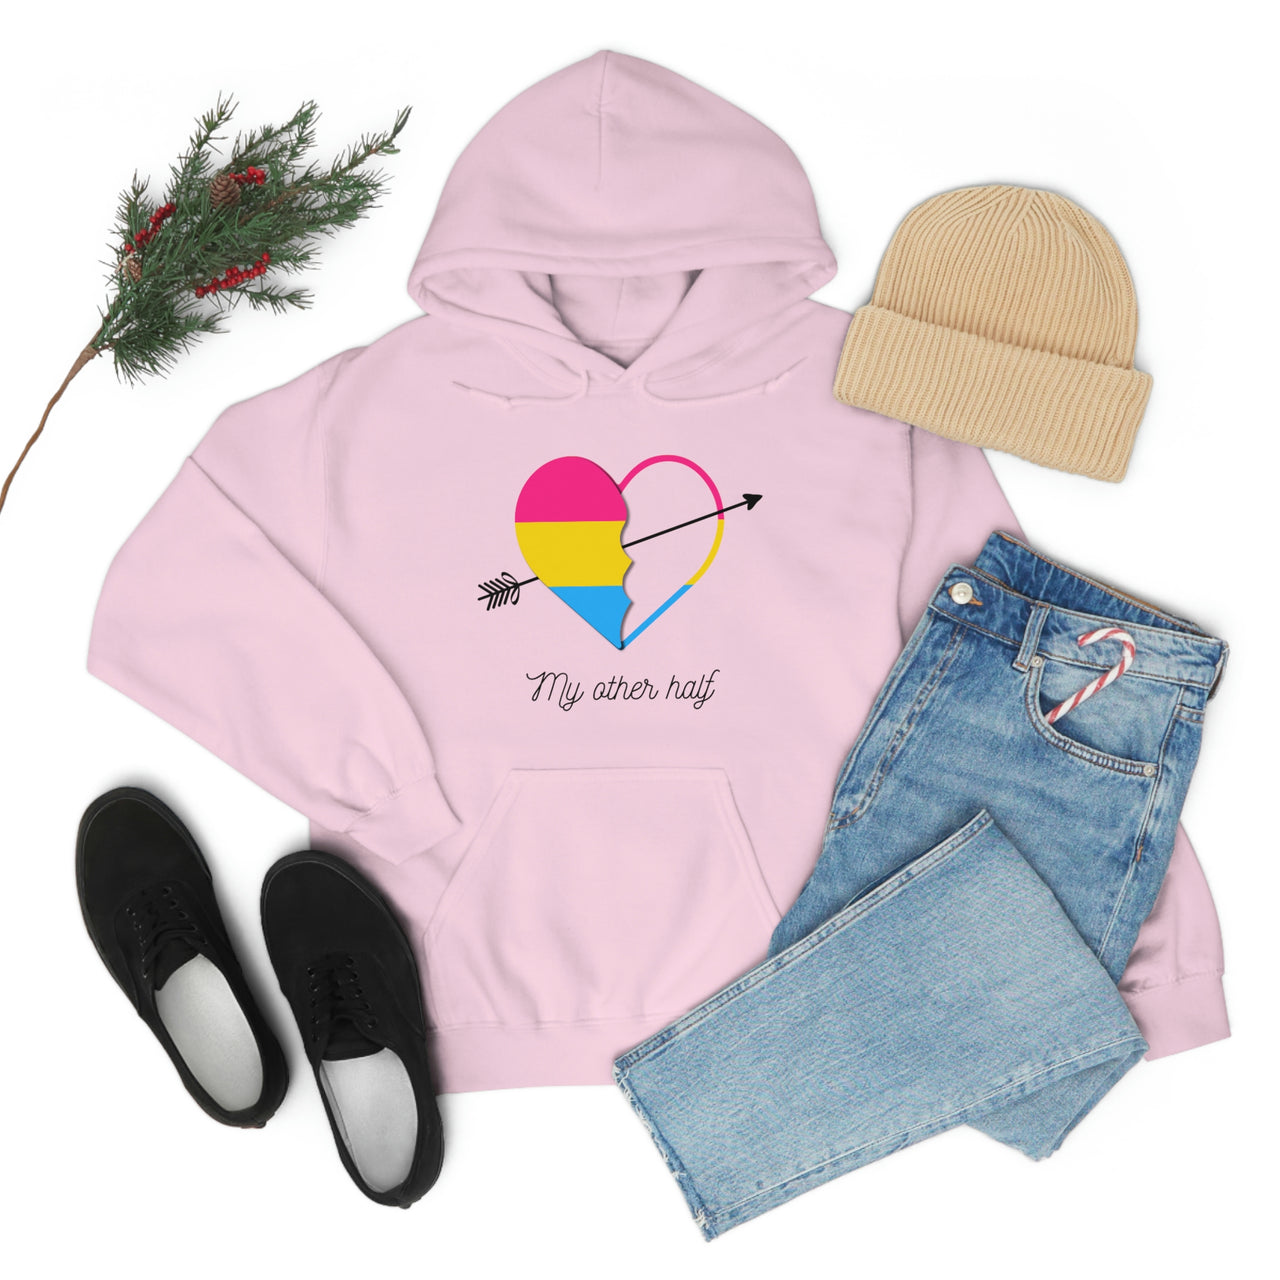 Pansexual Flag LGBTQ Affirmation Hoodie Unisex Size - The Other Half Printify